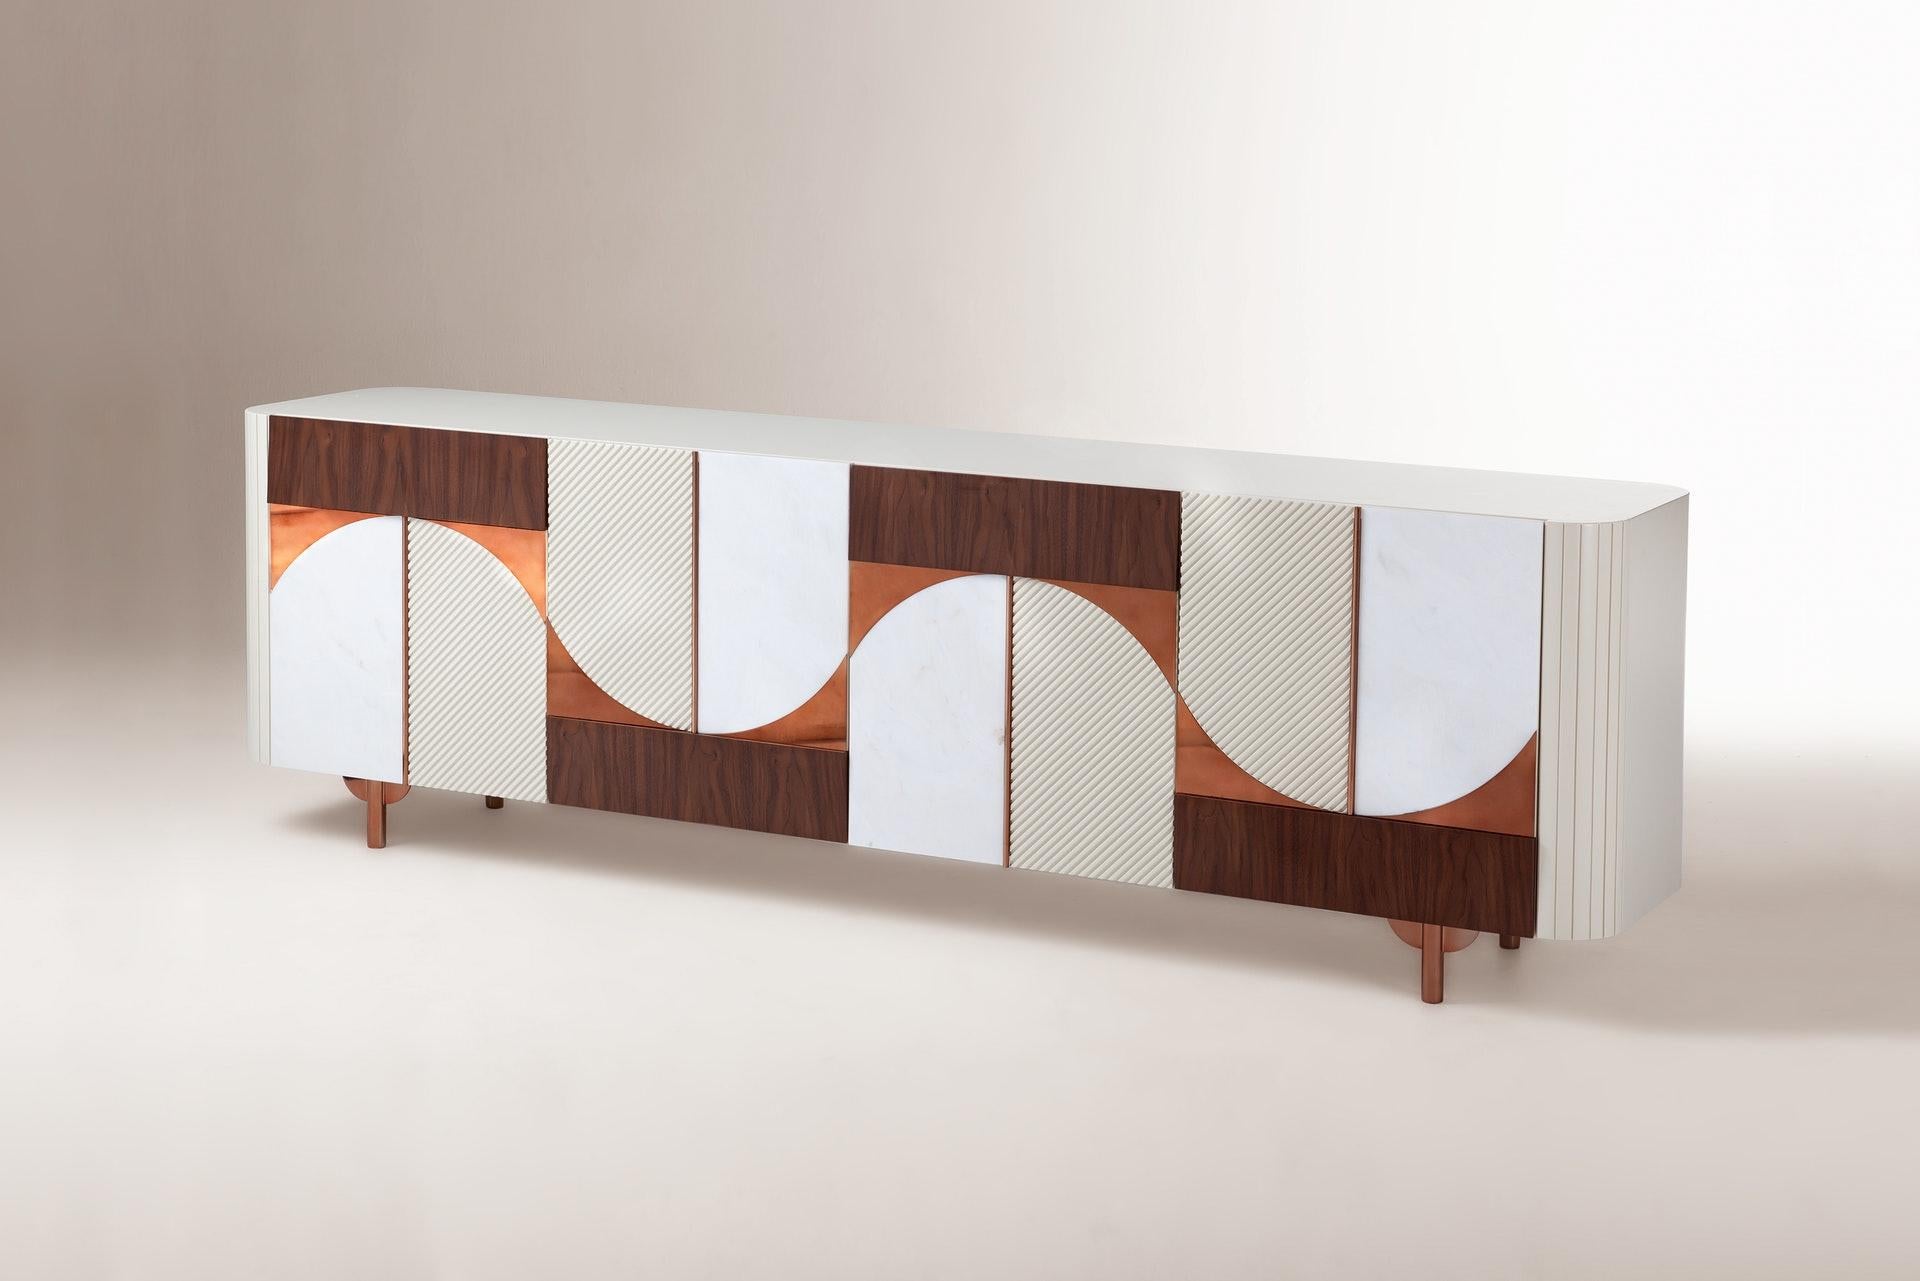 Metropolis Contemporary sideboard by Dooq
Dimensions: W 250 x D 50 x H 78 cm
Materials: MDF, Marble, Natural Walnut Veneer, Stainless Steel Plated Polished Copper, Feet: Stainless Steel Plated Polished Copper

Metropolis Sideboard was created